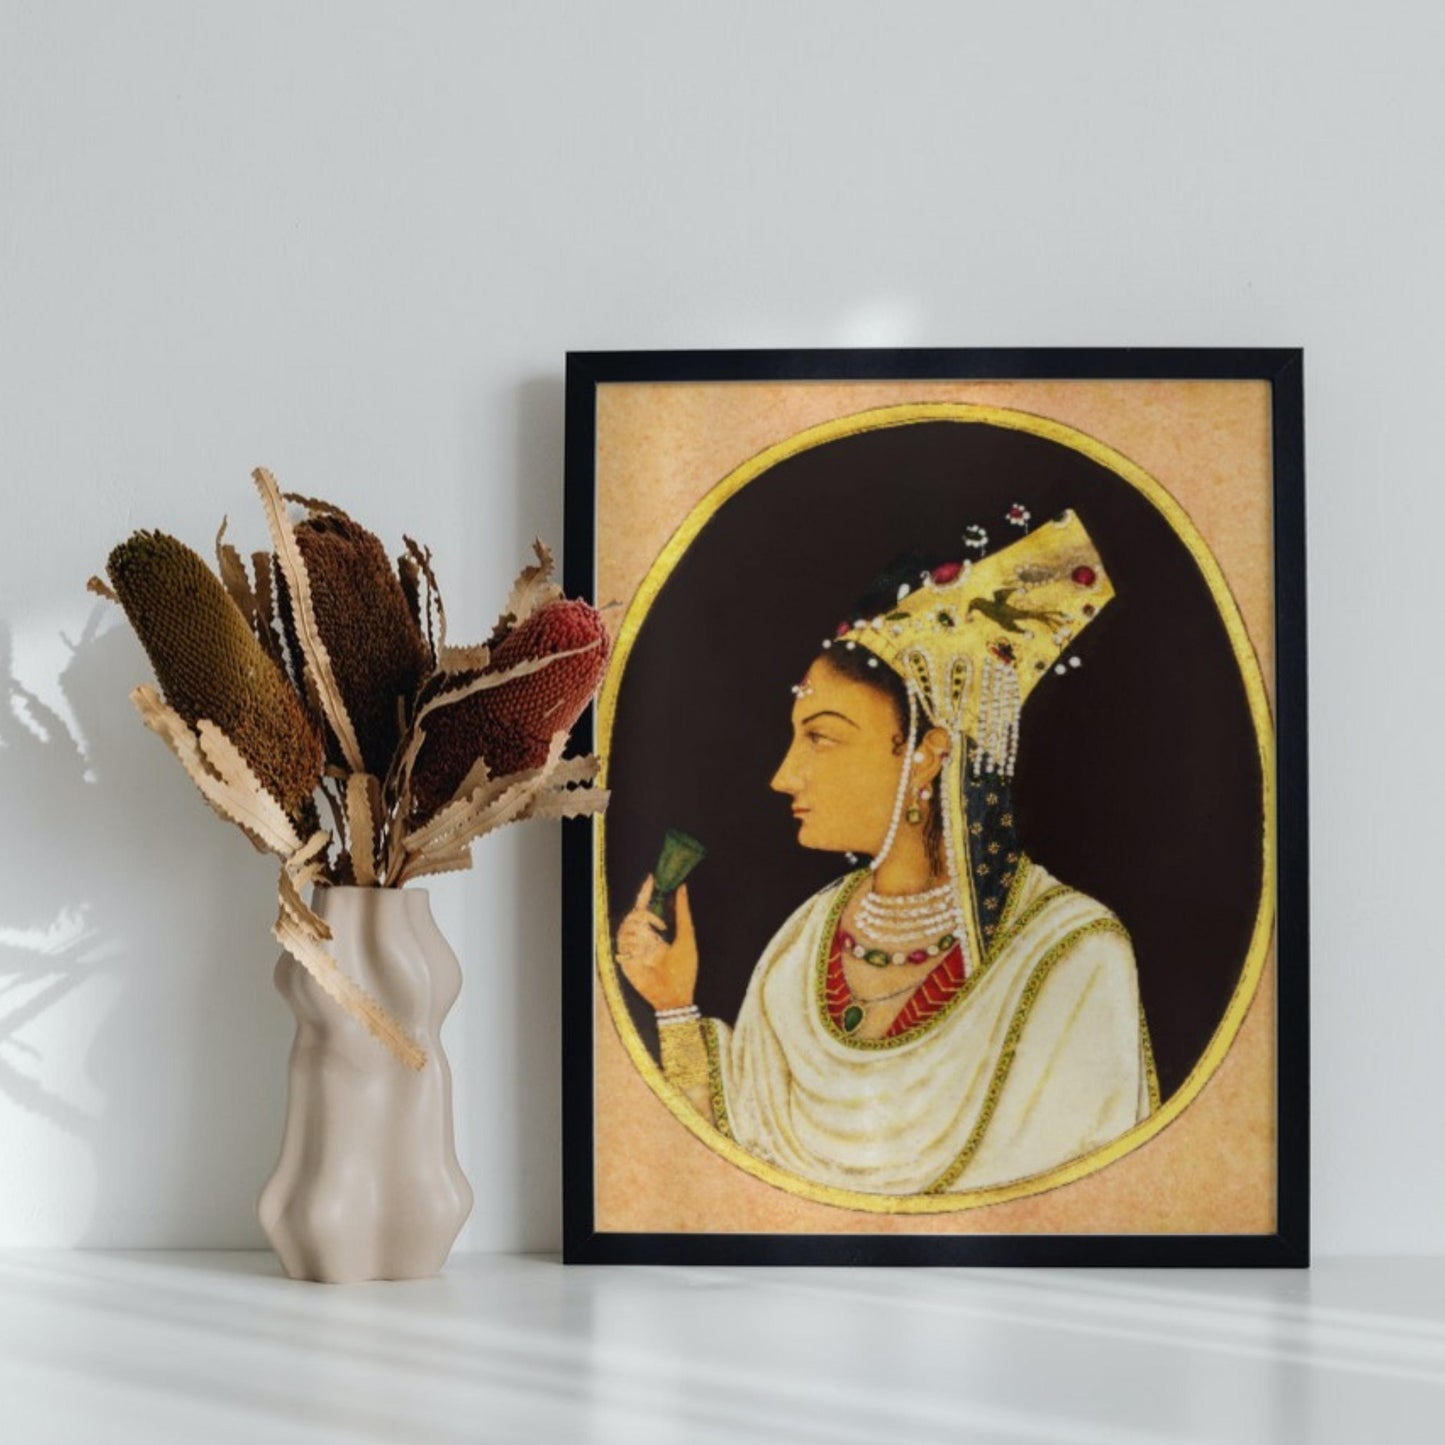 Oval Portrait of a Woman in a Chaghtai Hat Wall Art Framed Painting